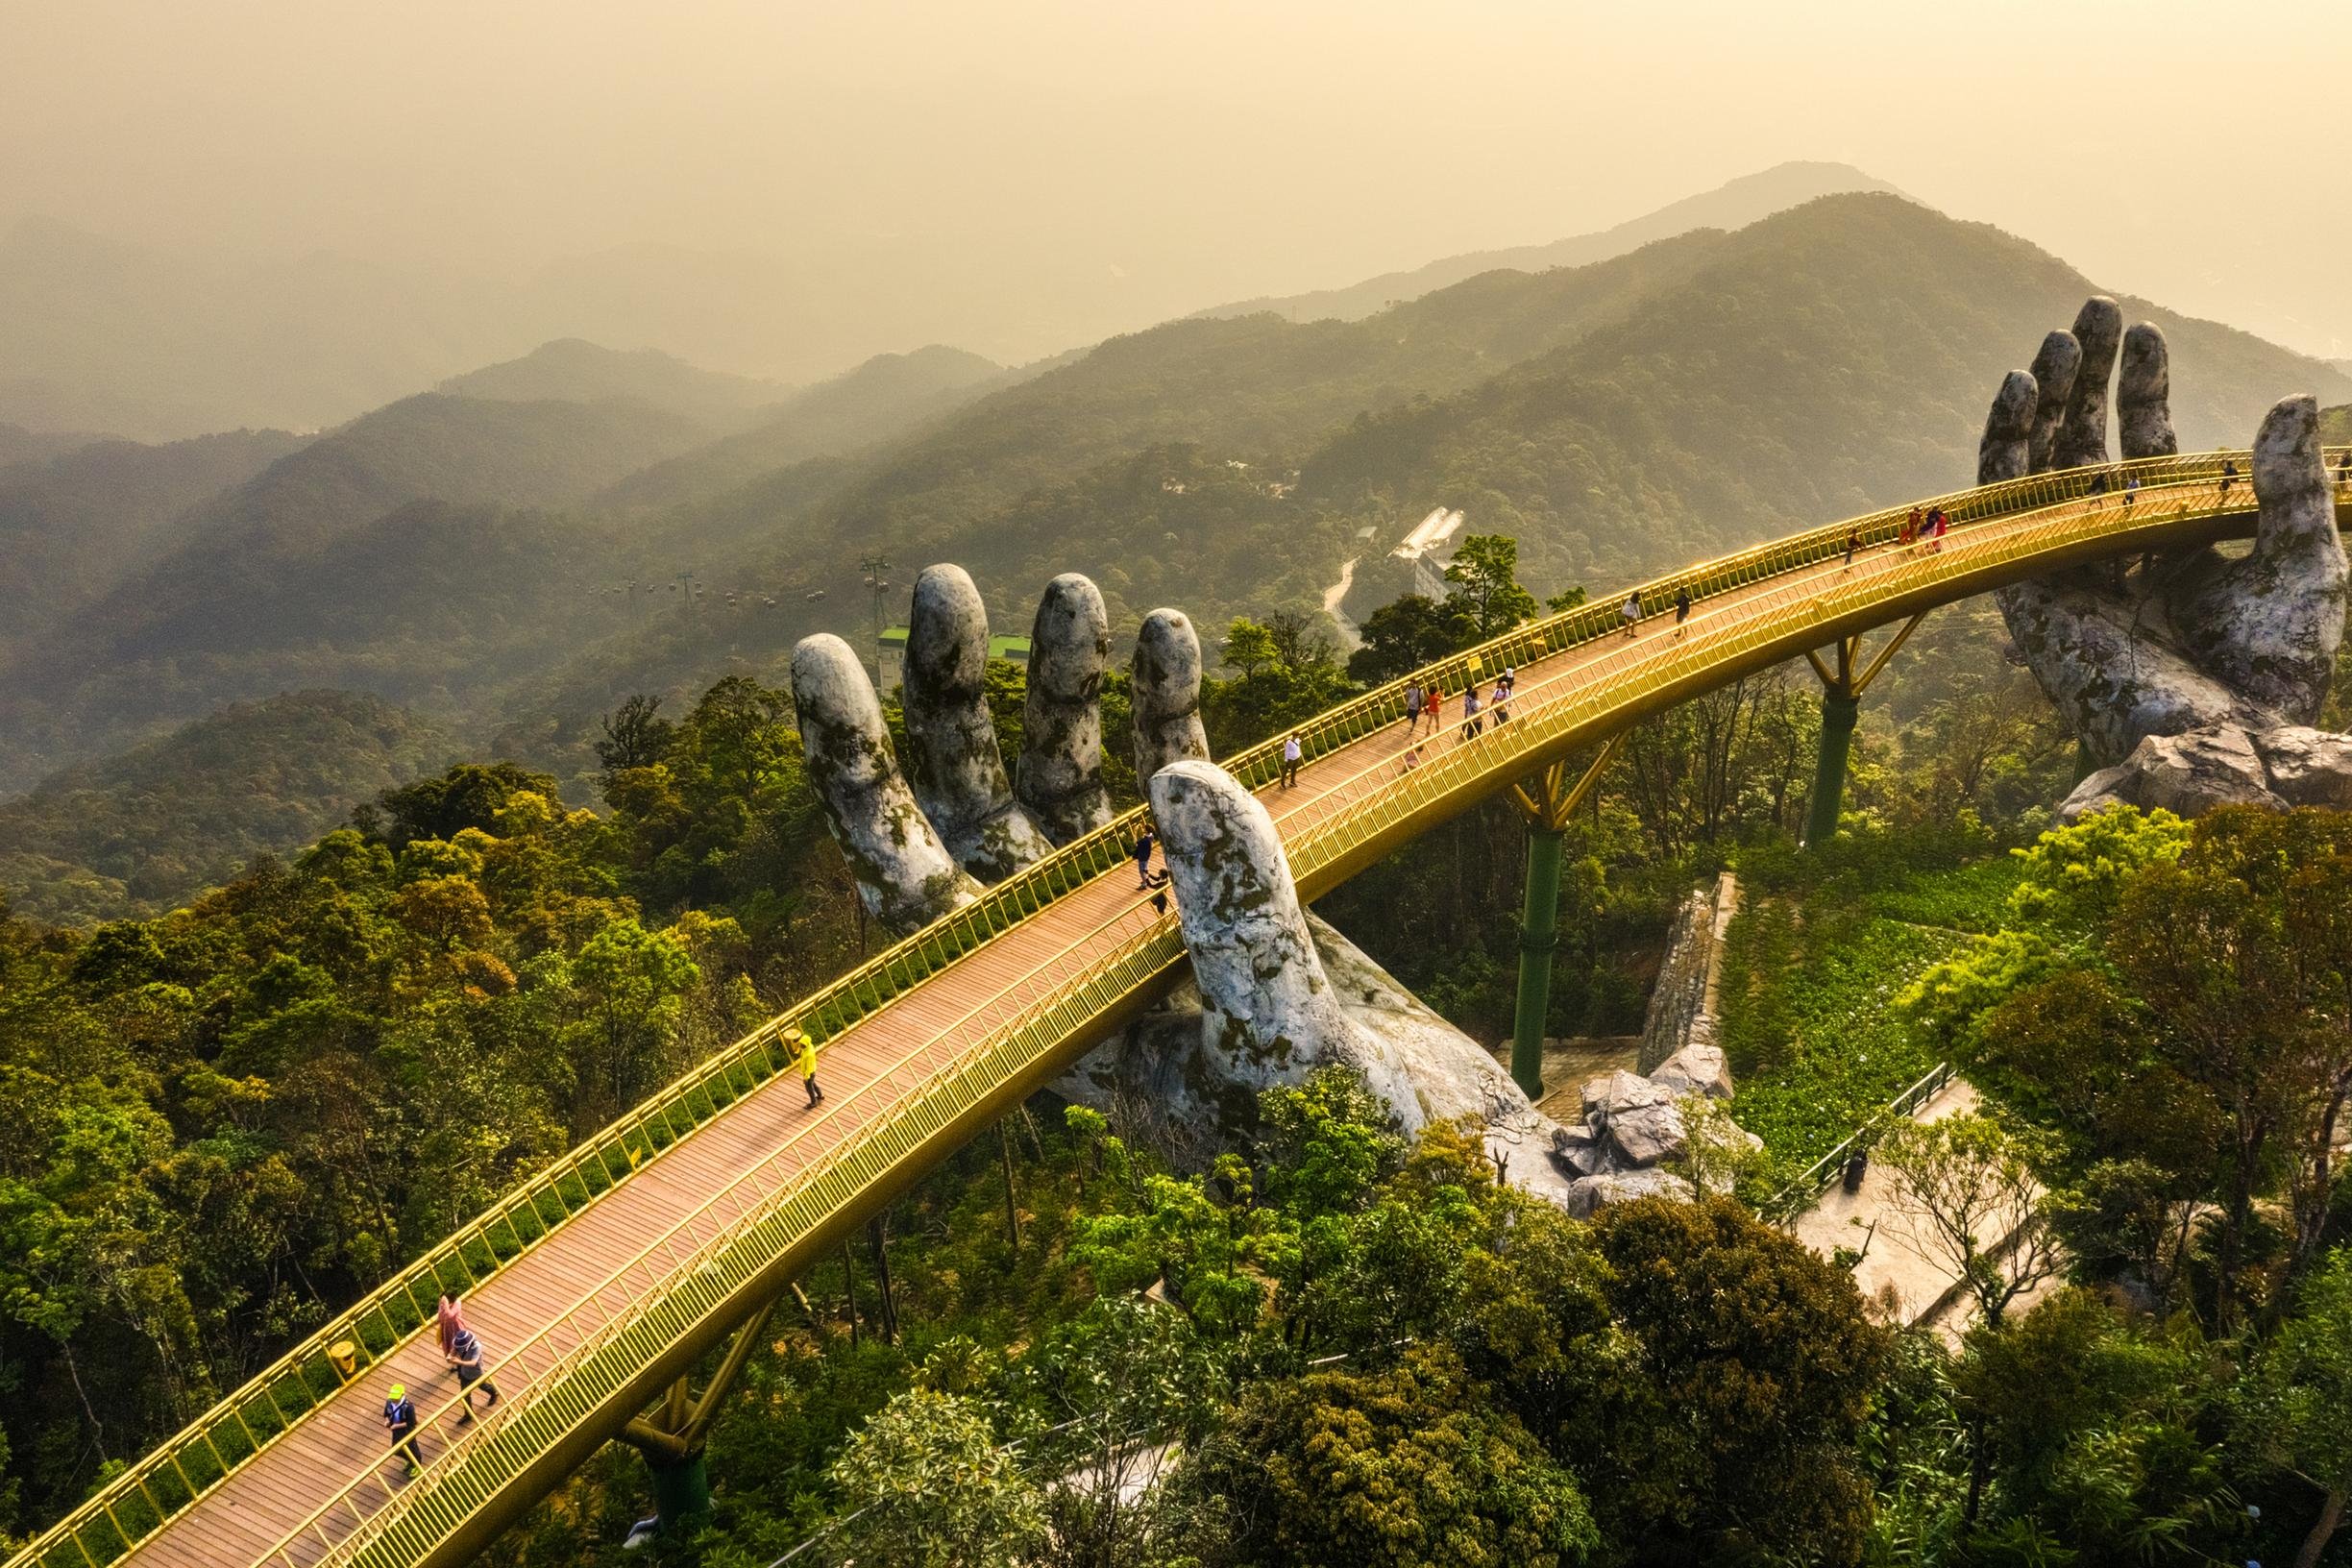 The famous Golden Bridge is lifted by two giant hands in the tourist resort on Ba Na Hill in Da Nang, Vietnam.